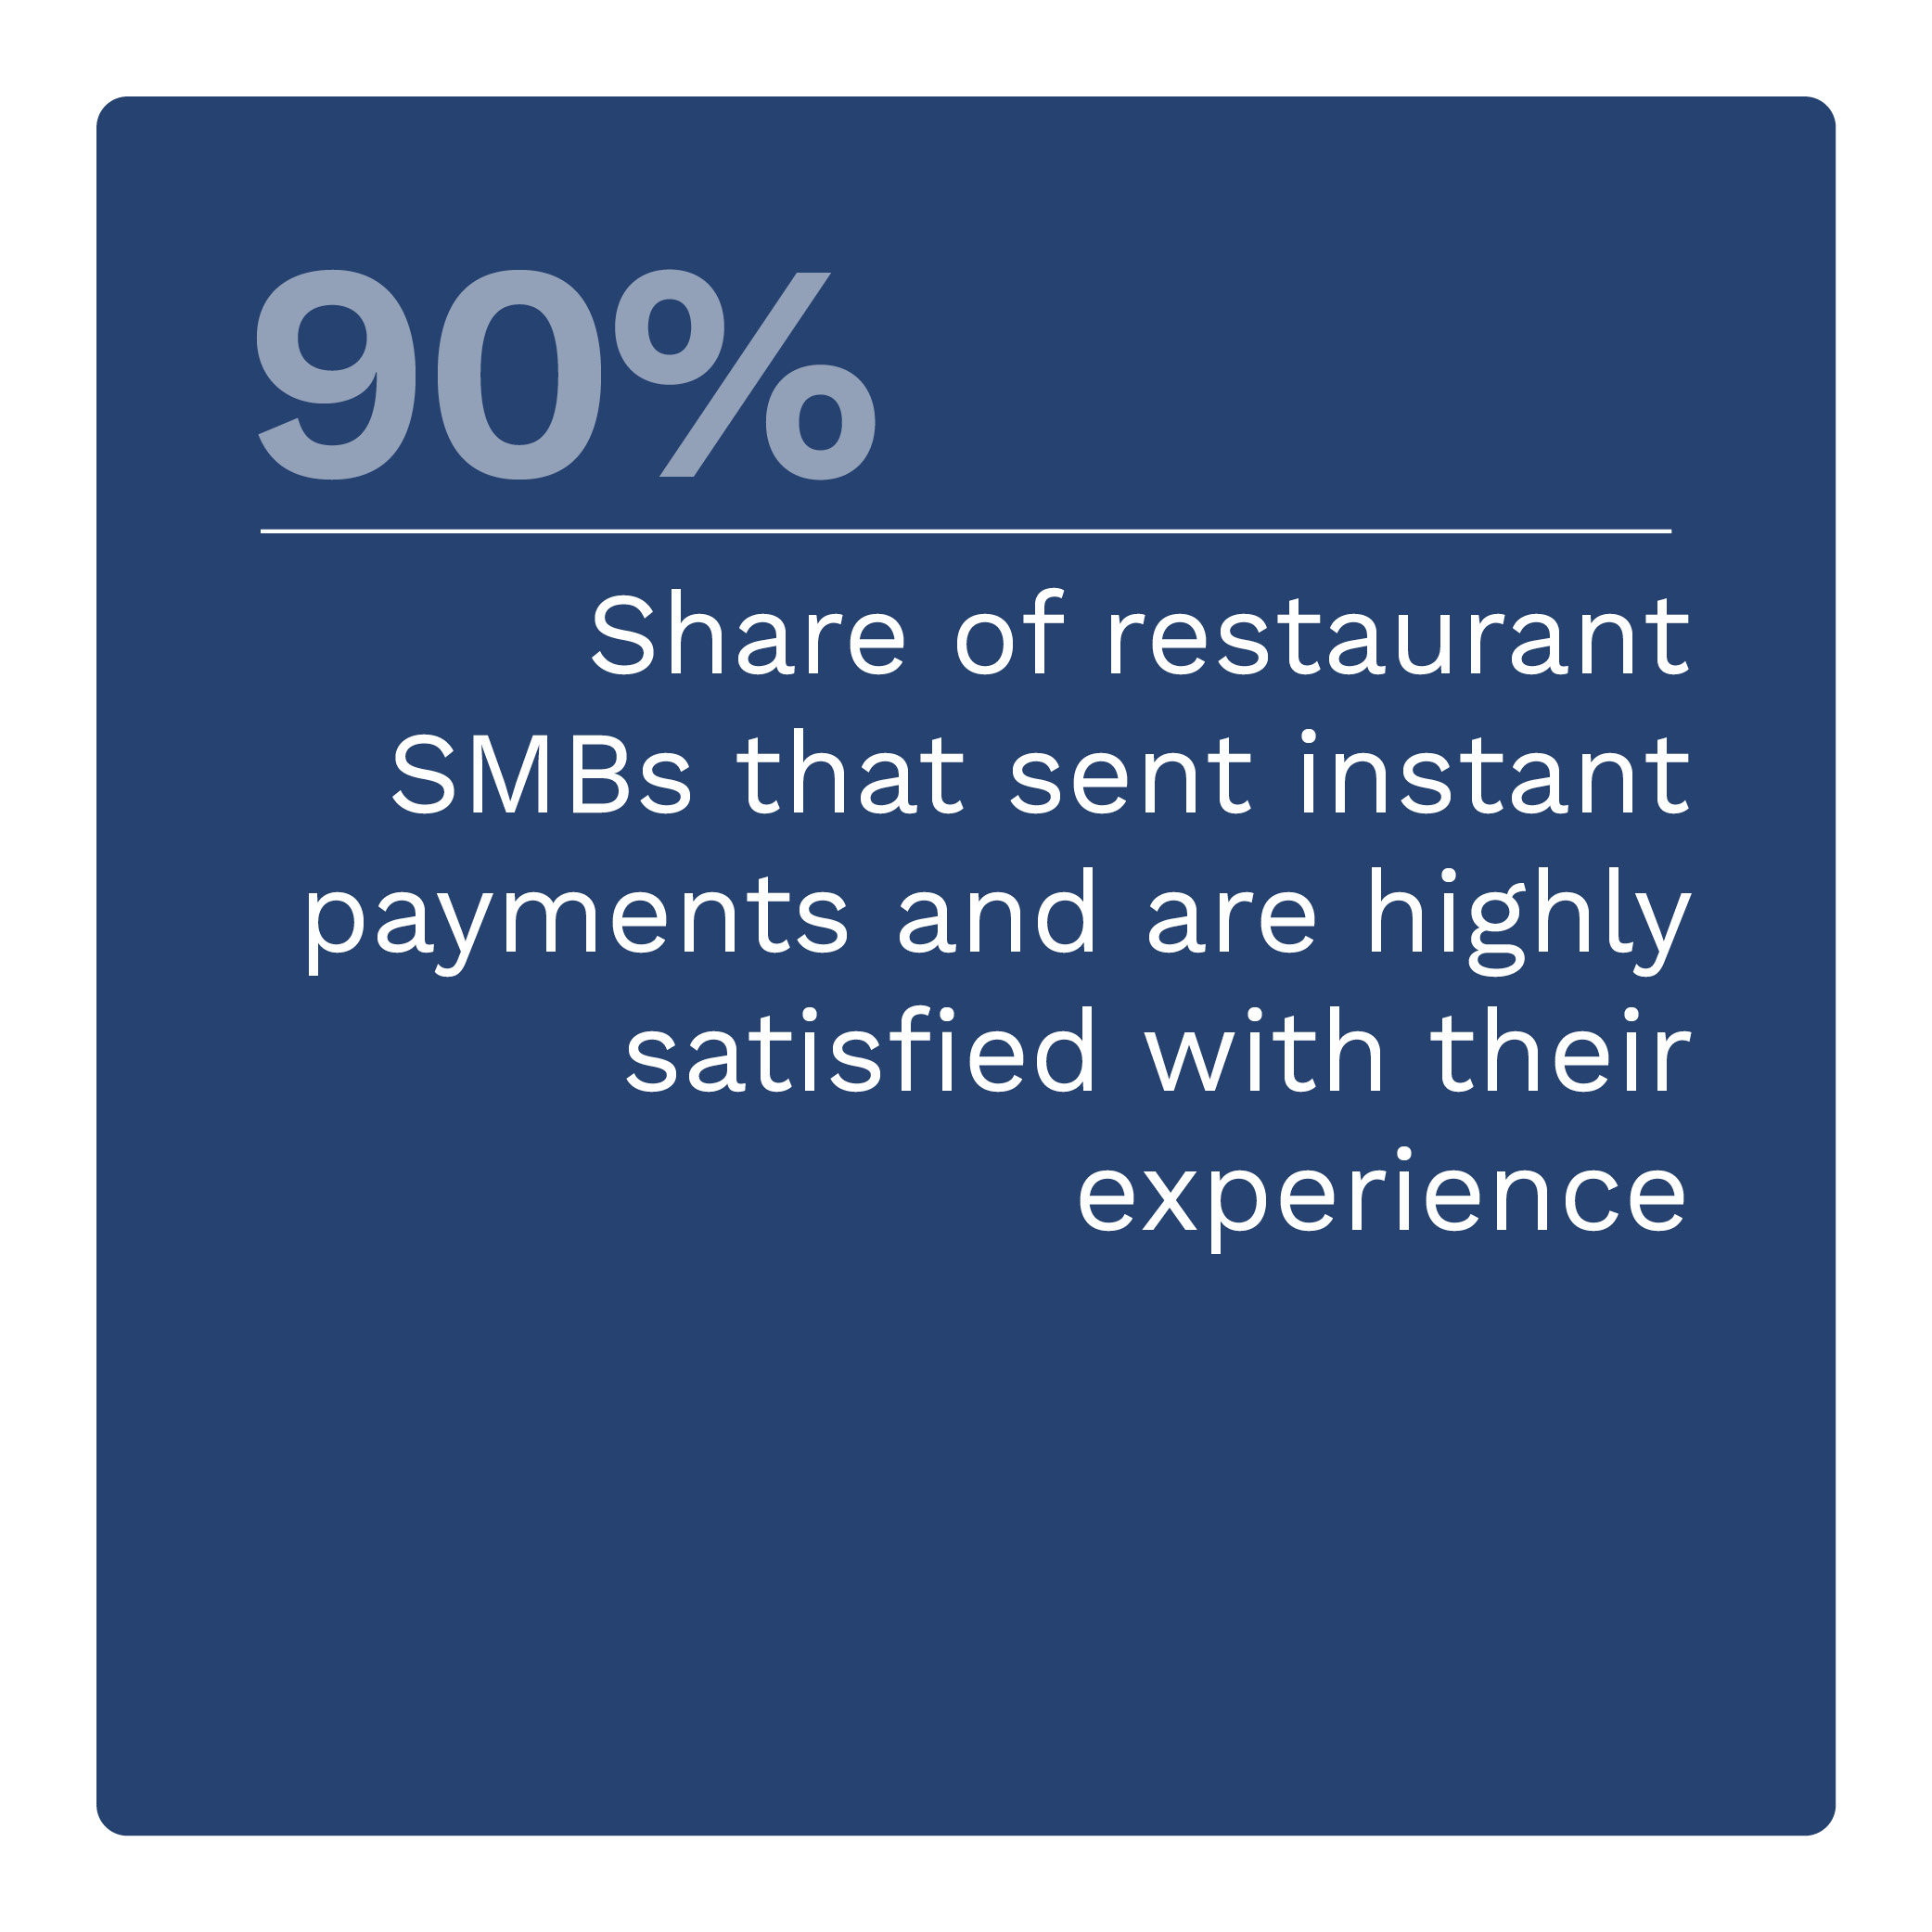 90%: Share of restaurant SMBs that sent instant payments and are highly satisfied with their experience